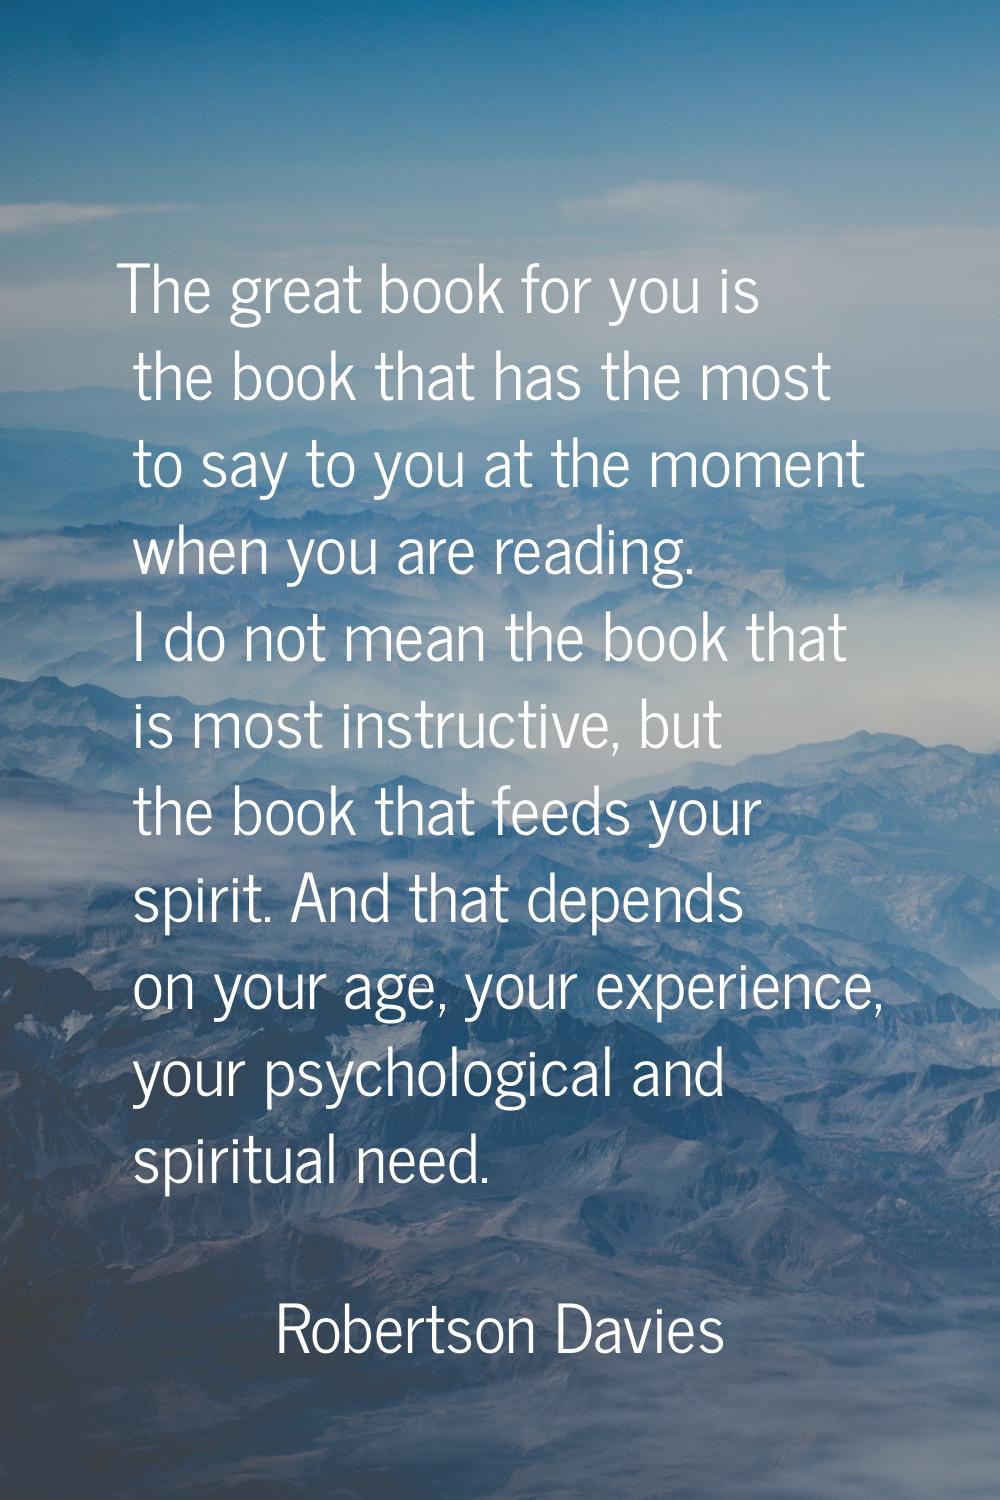 The great book for you is the book that has the most to say to you at the moment when you are readi